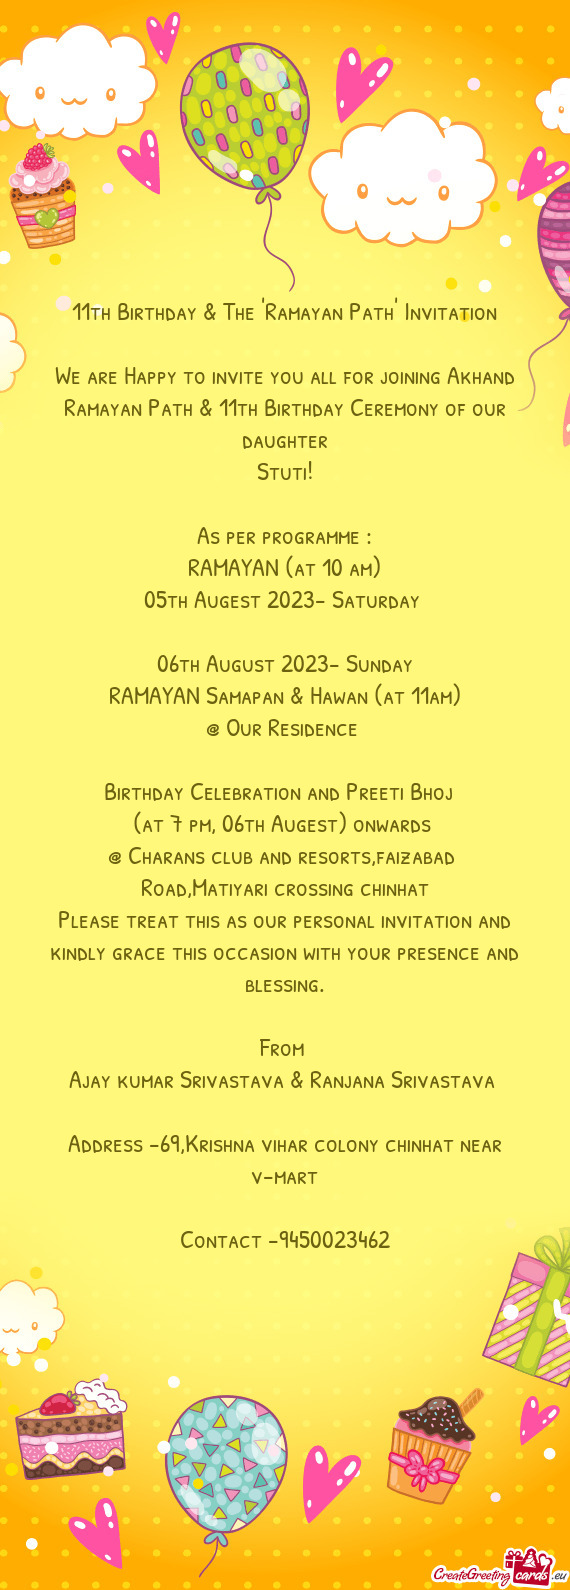 We are Happy to invite you all for joining Akhand Ramayan Path & 11th Birthday Ceremony of our daugh